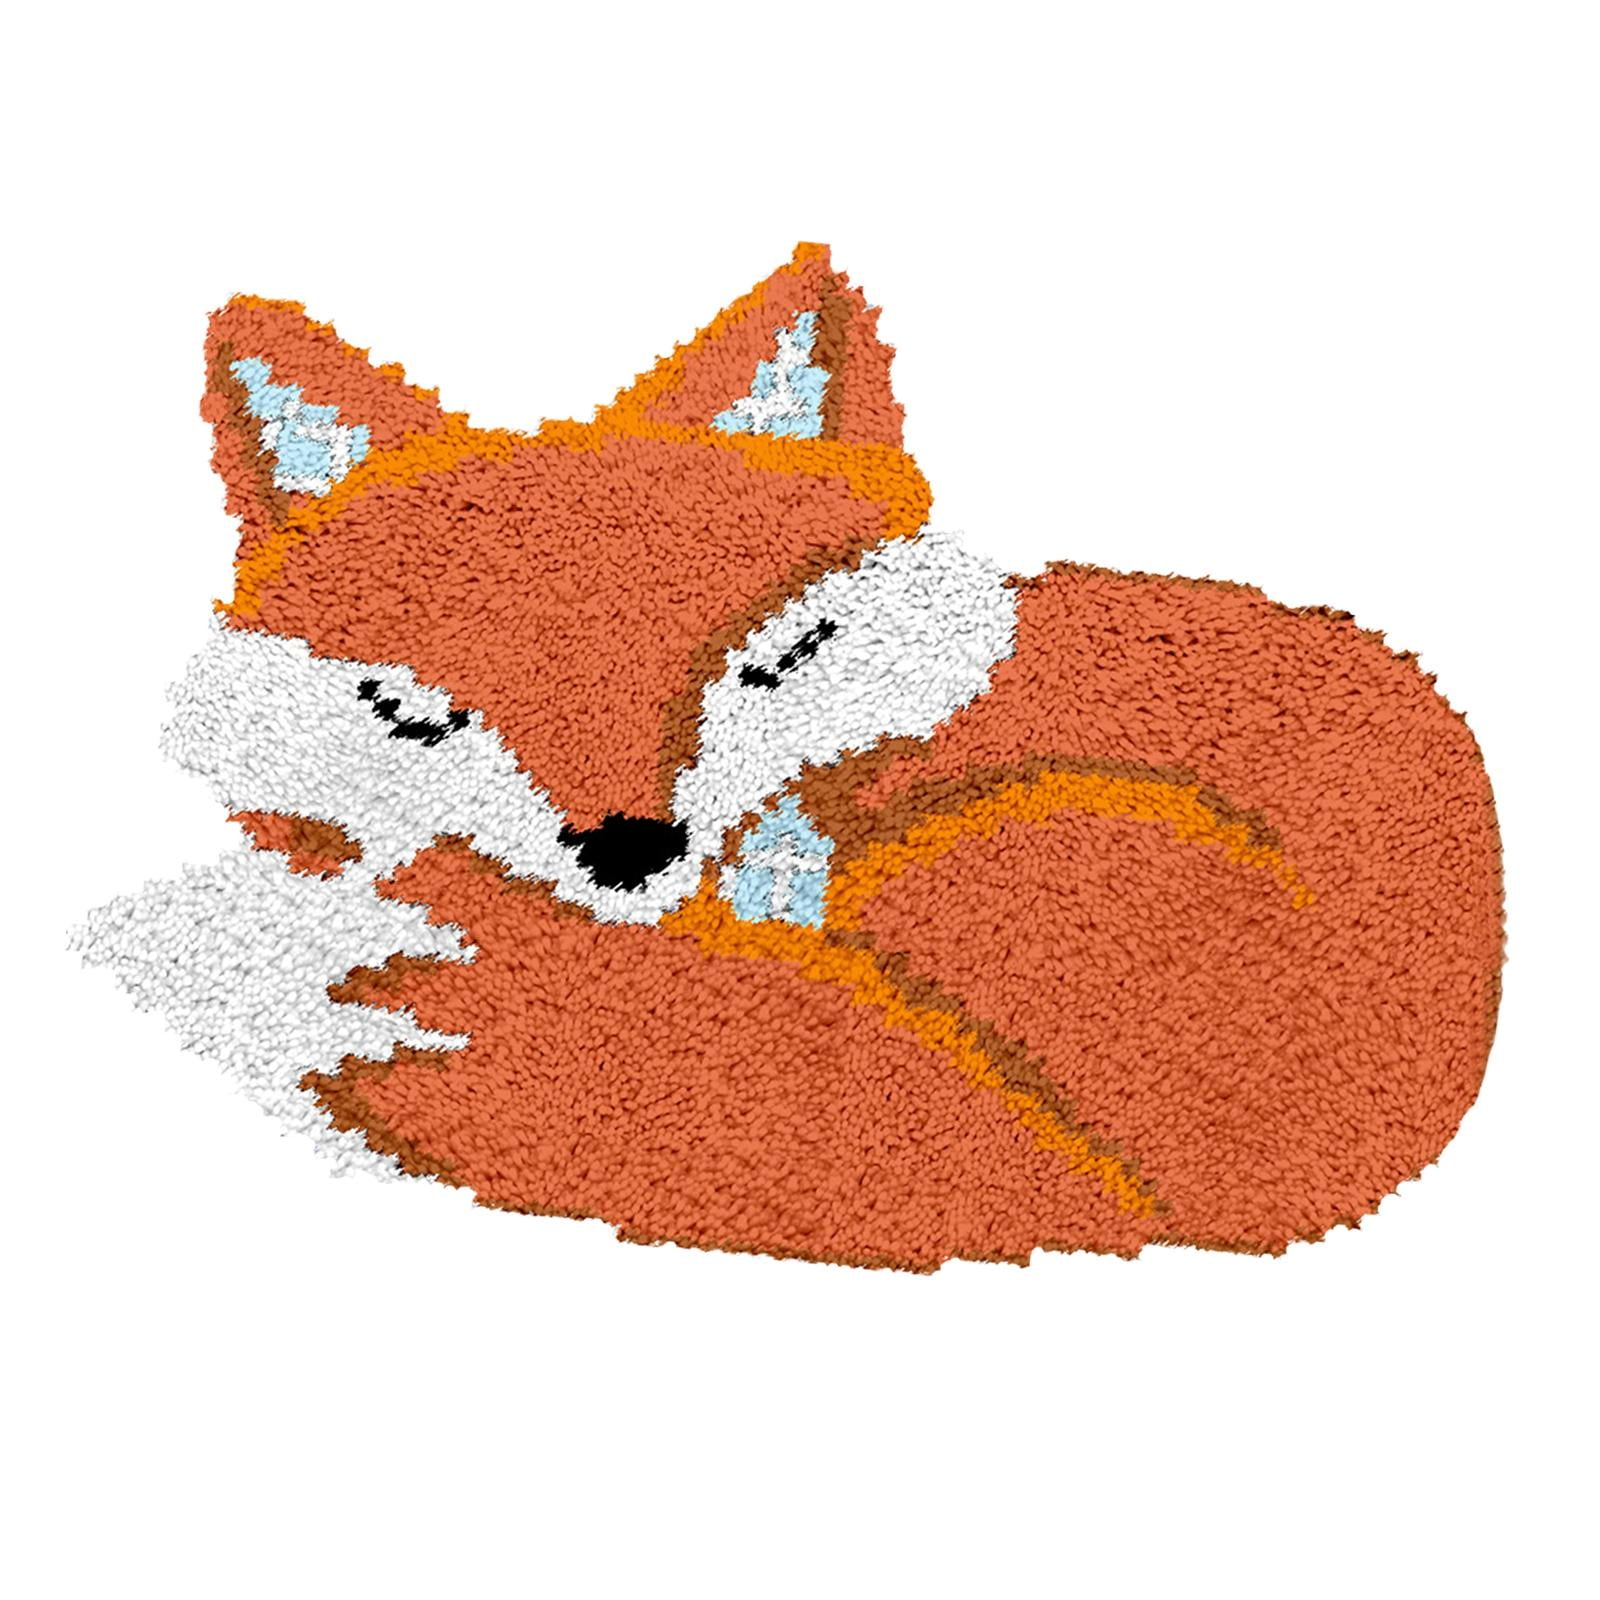 Fox Latch Rug Hooking Kits with Handles for Adults Beginners, DIY Crafts  (20 x 15 In)